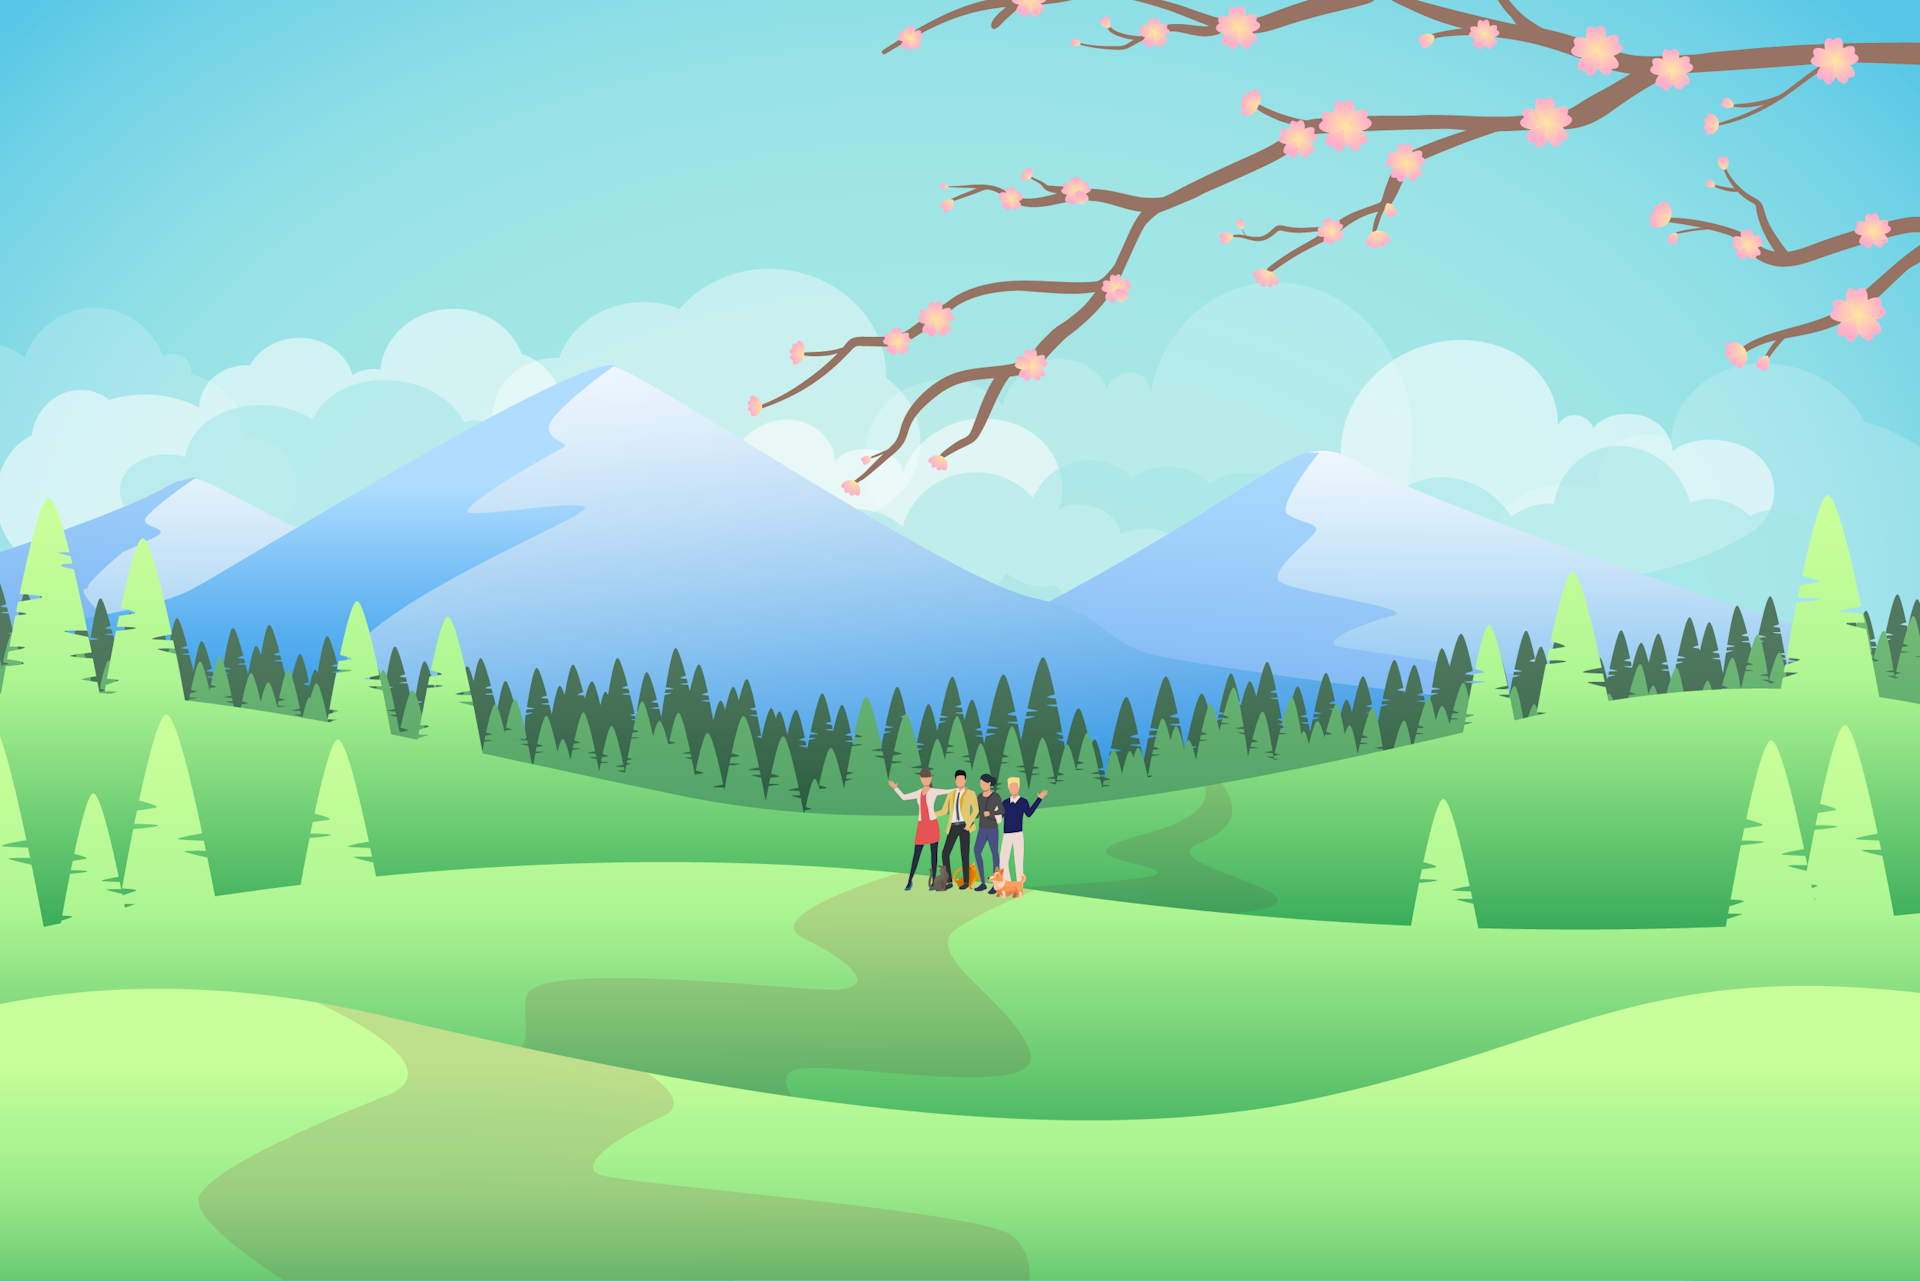 Illustration of a group of people on a green meadow with pine trees, with mountains in the distance and a branch of pink blossoms overhead.